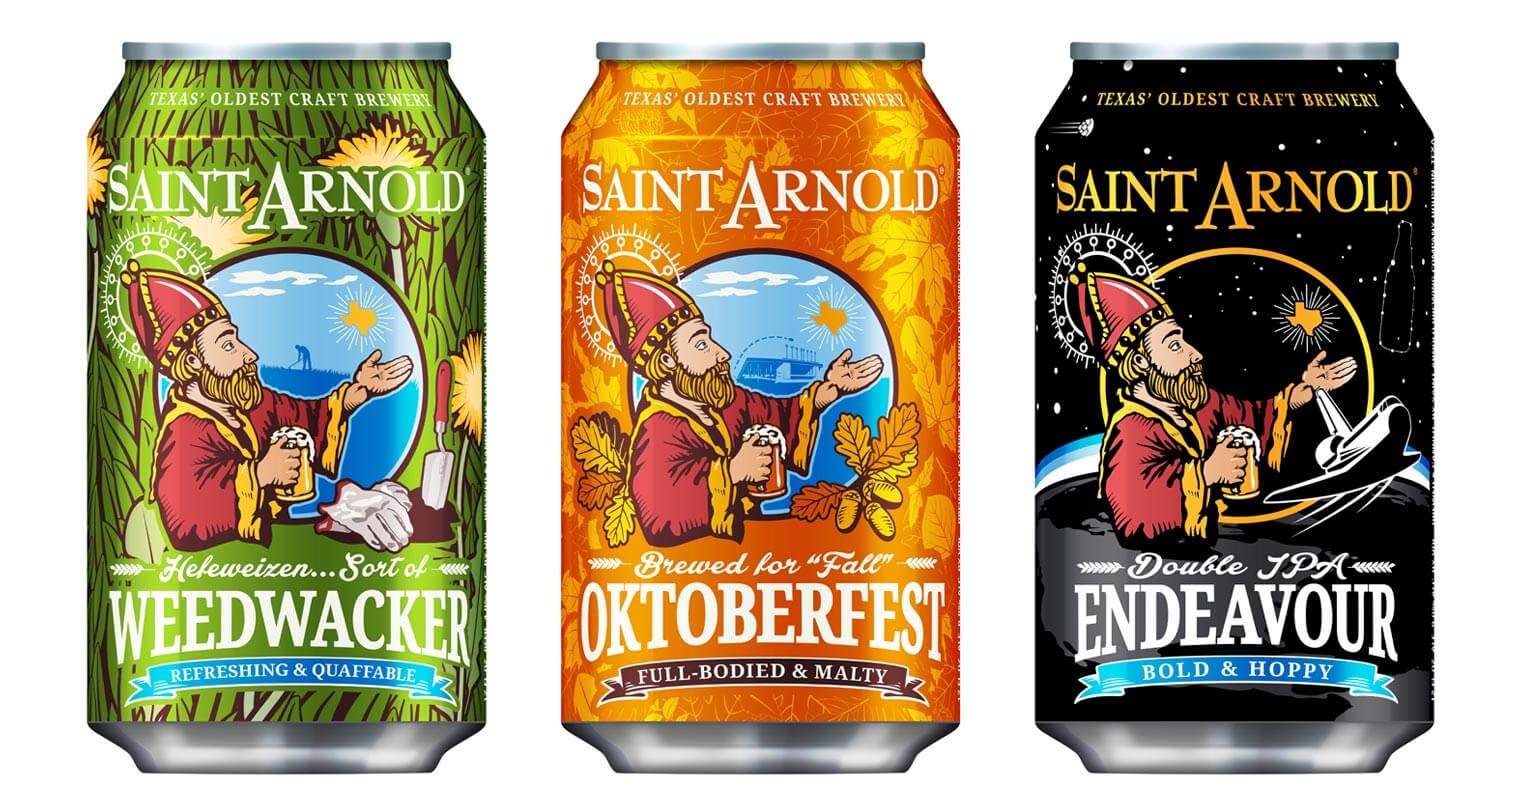 Saint Arnold Brewing Expands Cans to Include Weedwacker and Endeavour, featured image